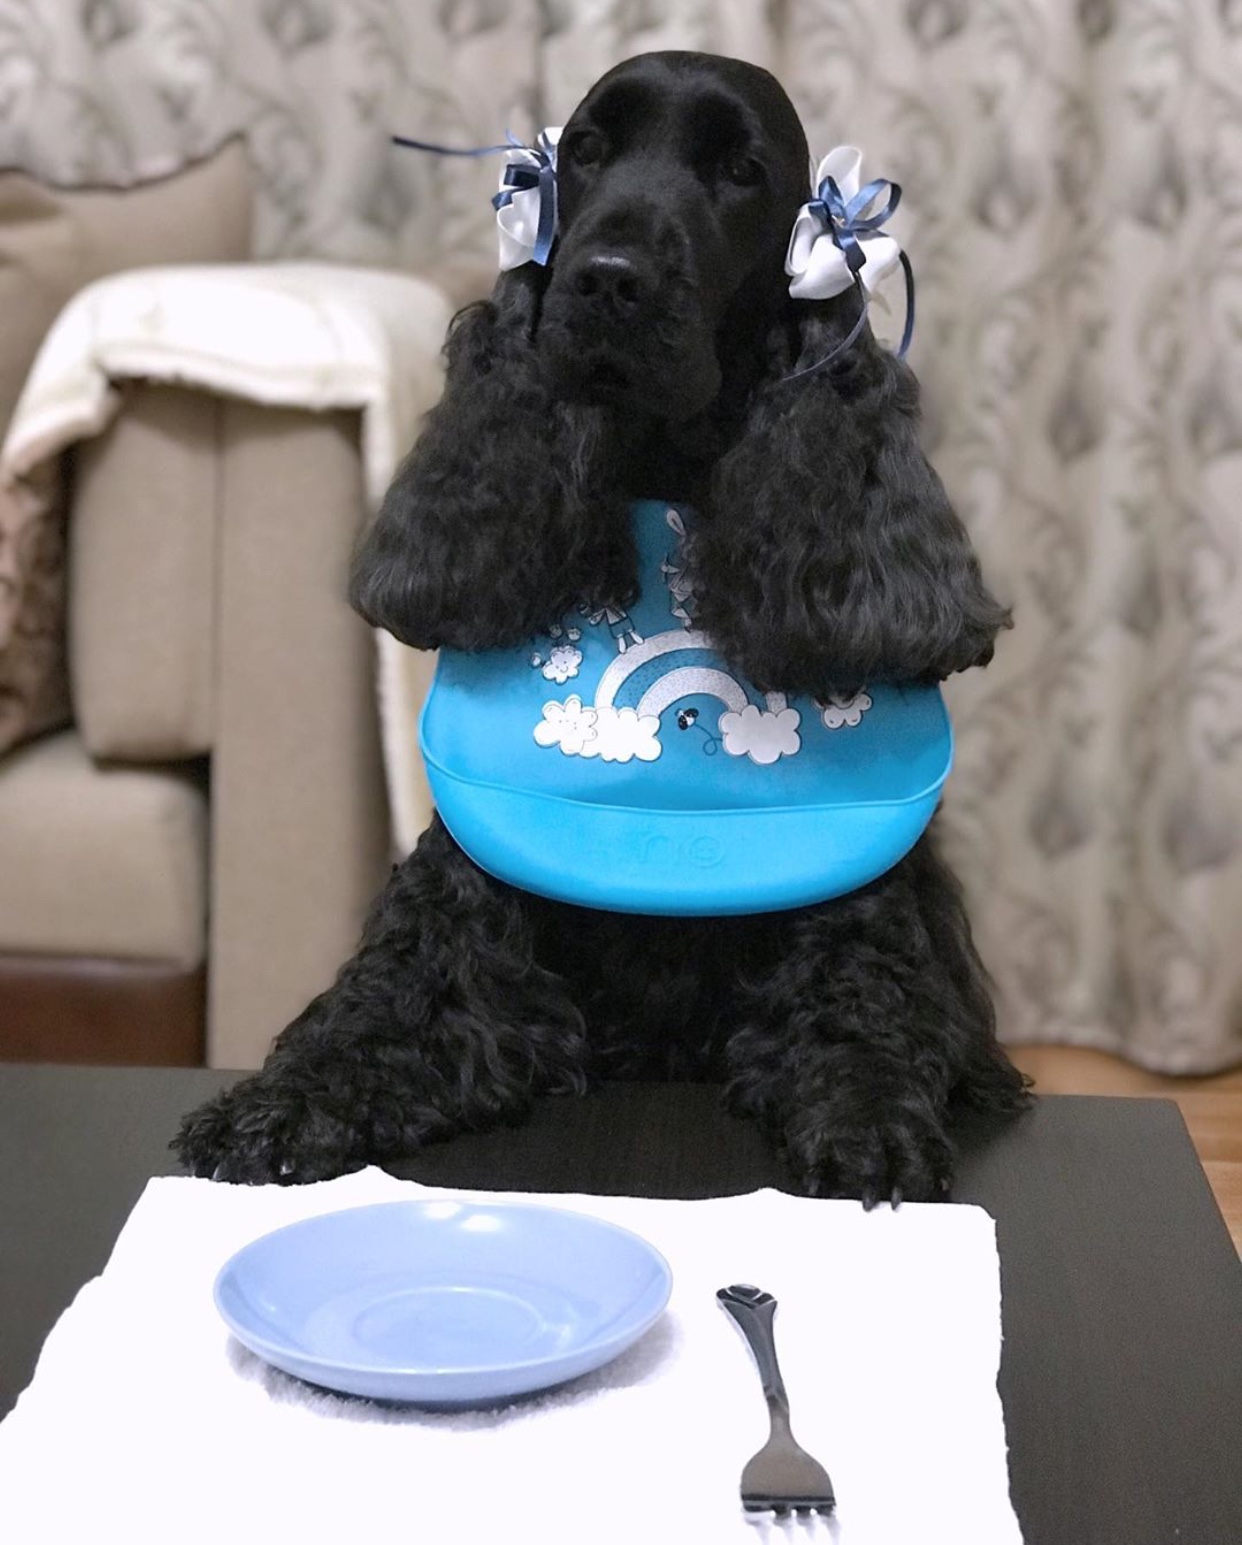 A black English Cocker Spaniel wearing a bib with pocket while sitting at the table in front of a plate and fork